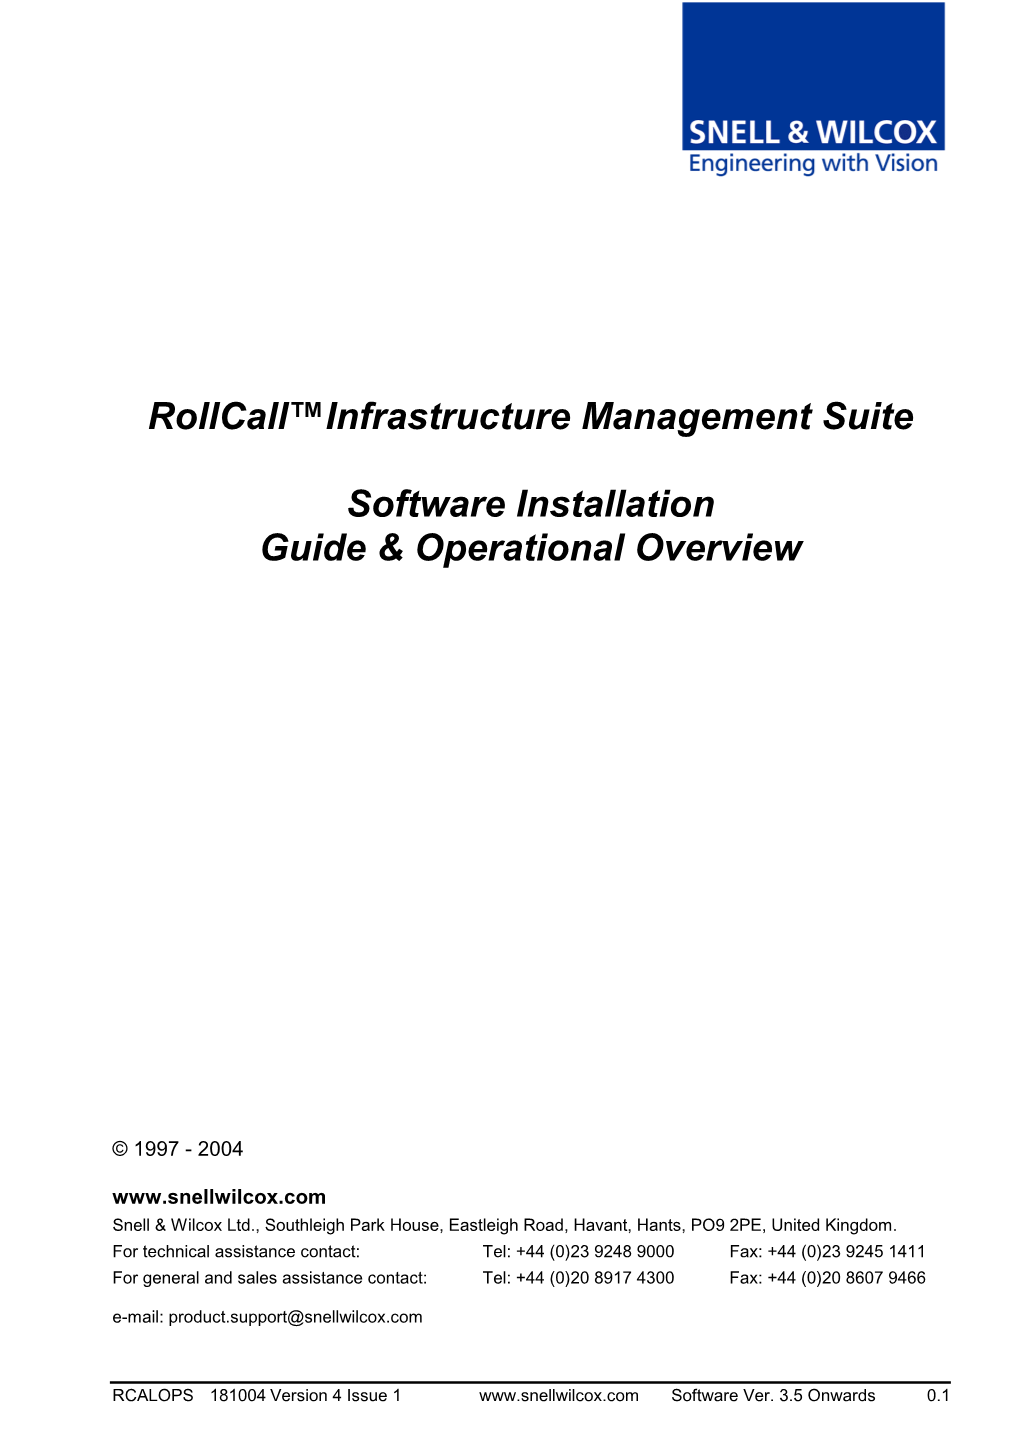 Rollcall™Infrastructure Management Suite Software Installation Guide